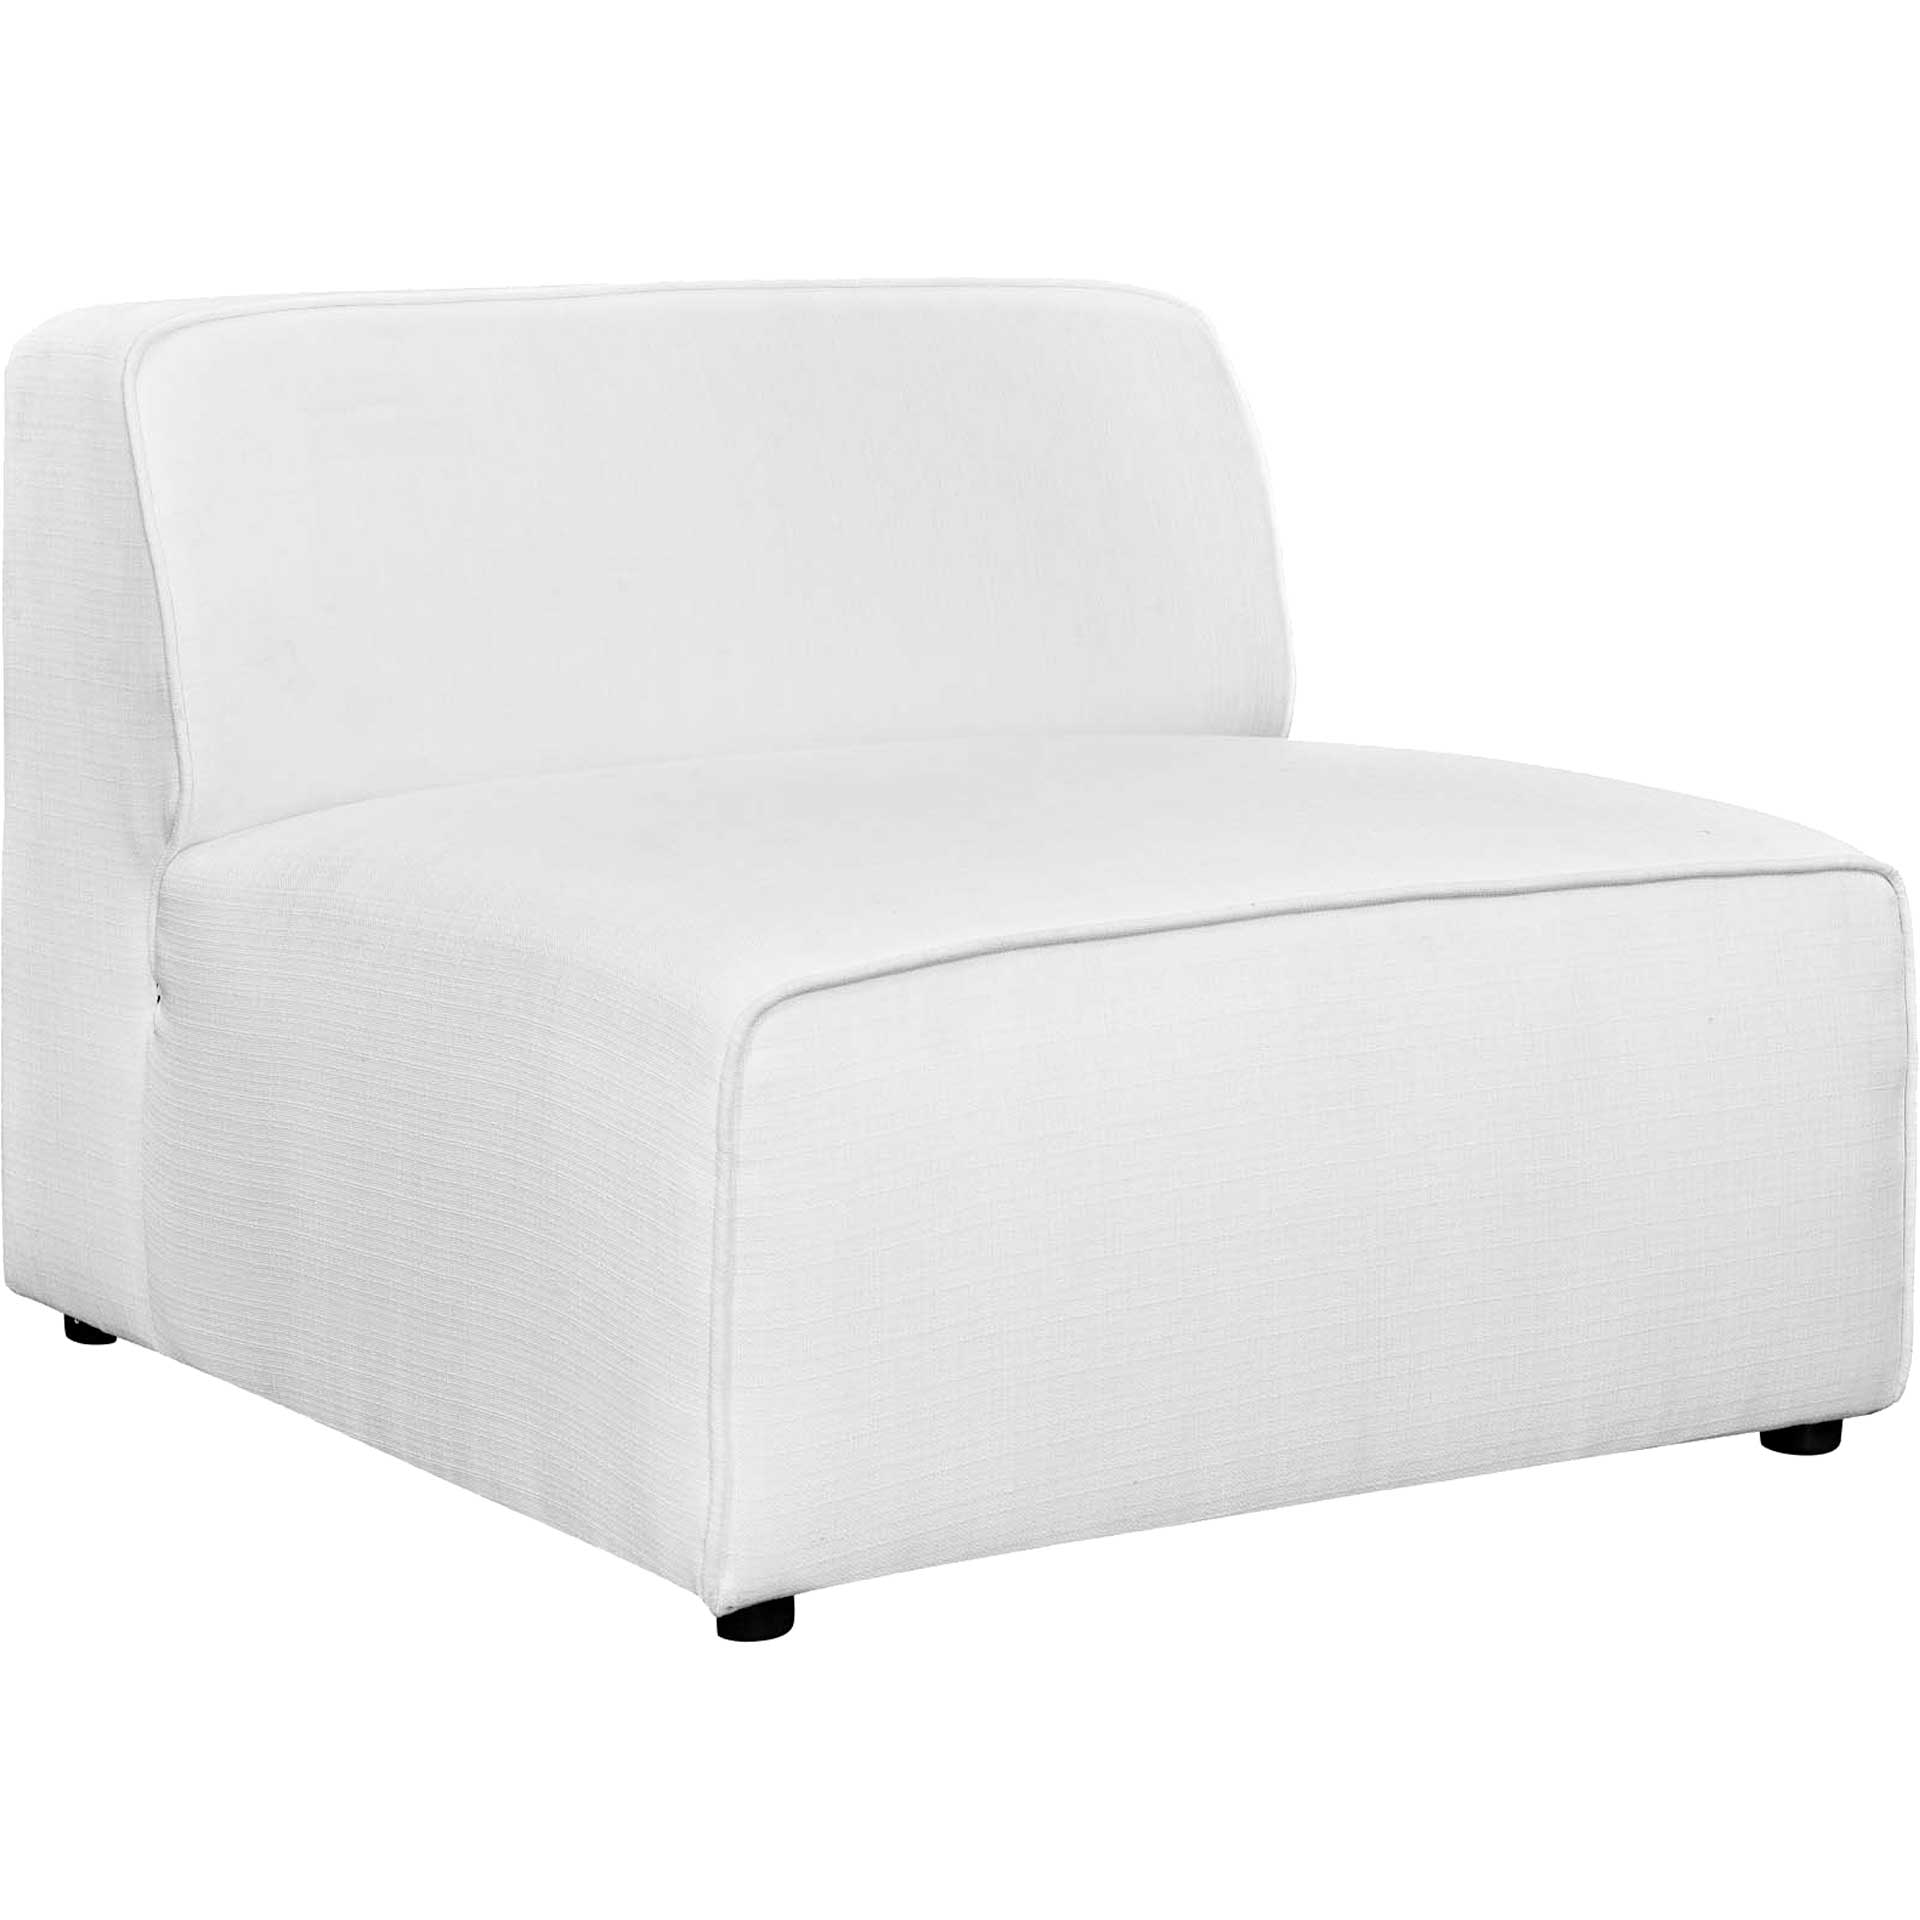 Maisie 5 Piece L-Shaped Sectional Sofa White